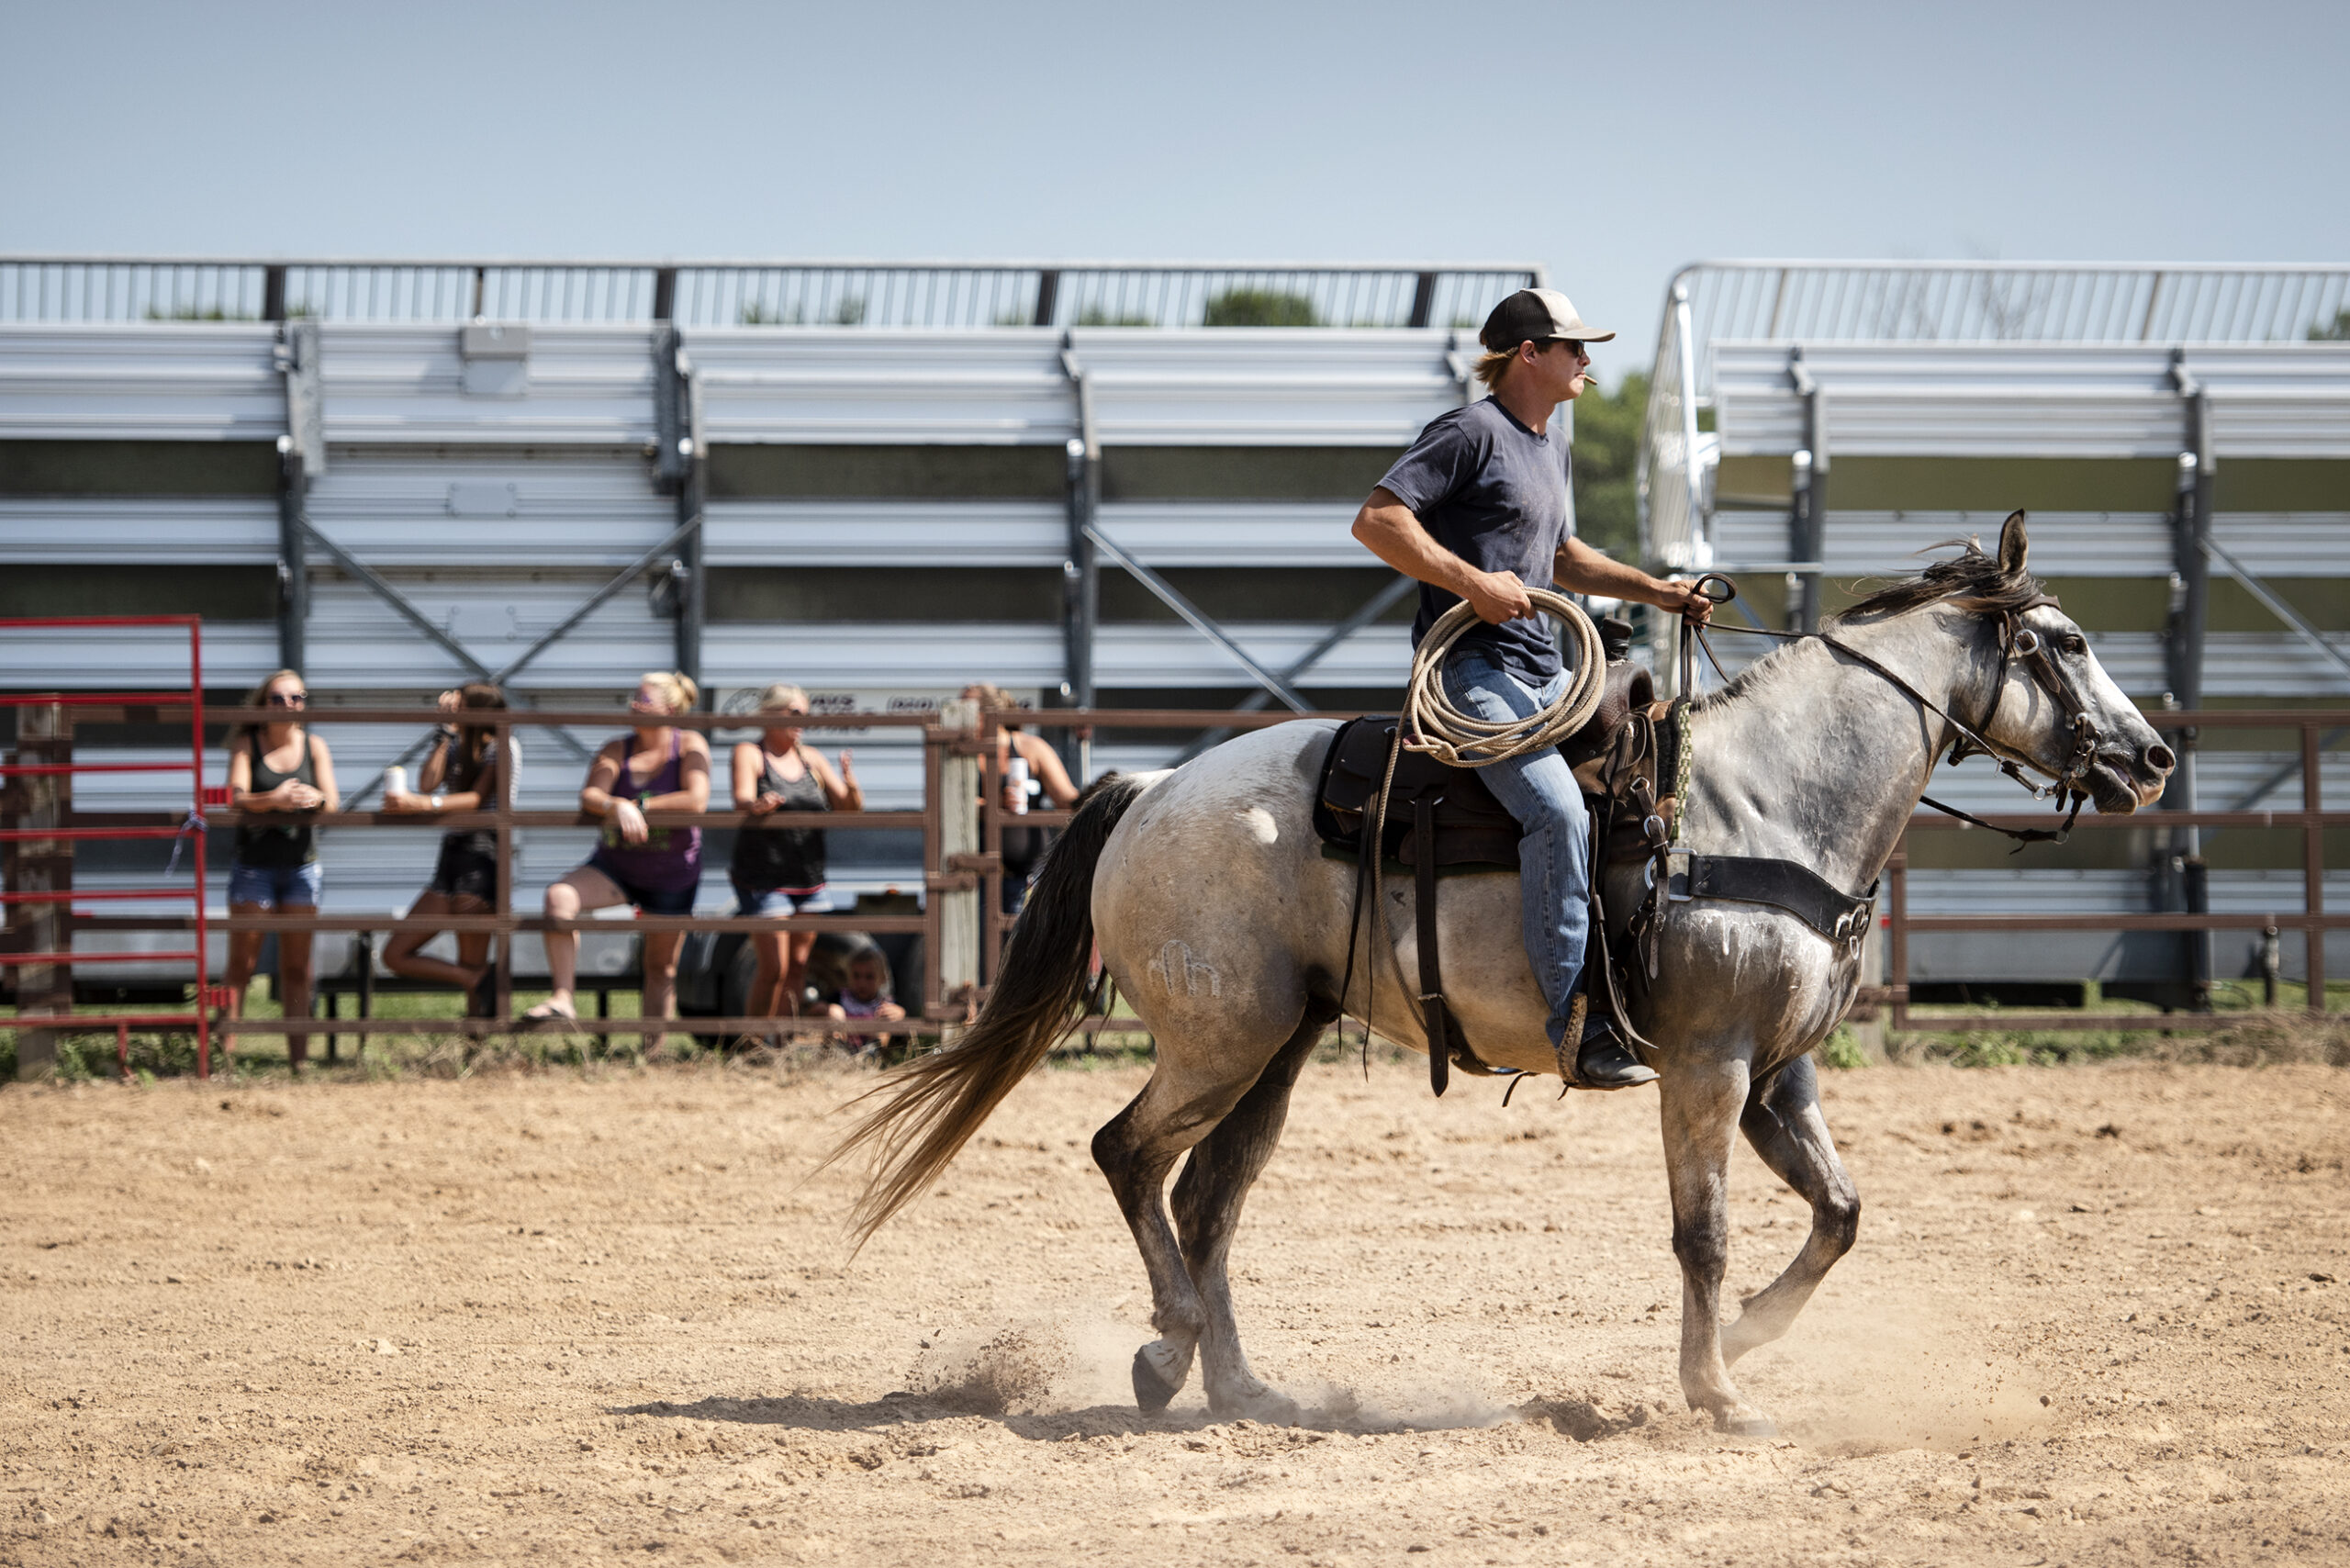 A man riding a horse holds a rope as he rides on a dirt arena